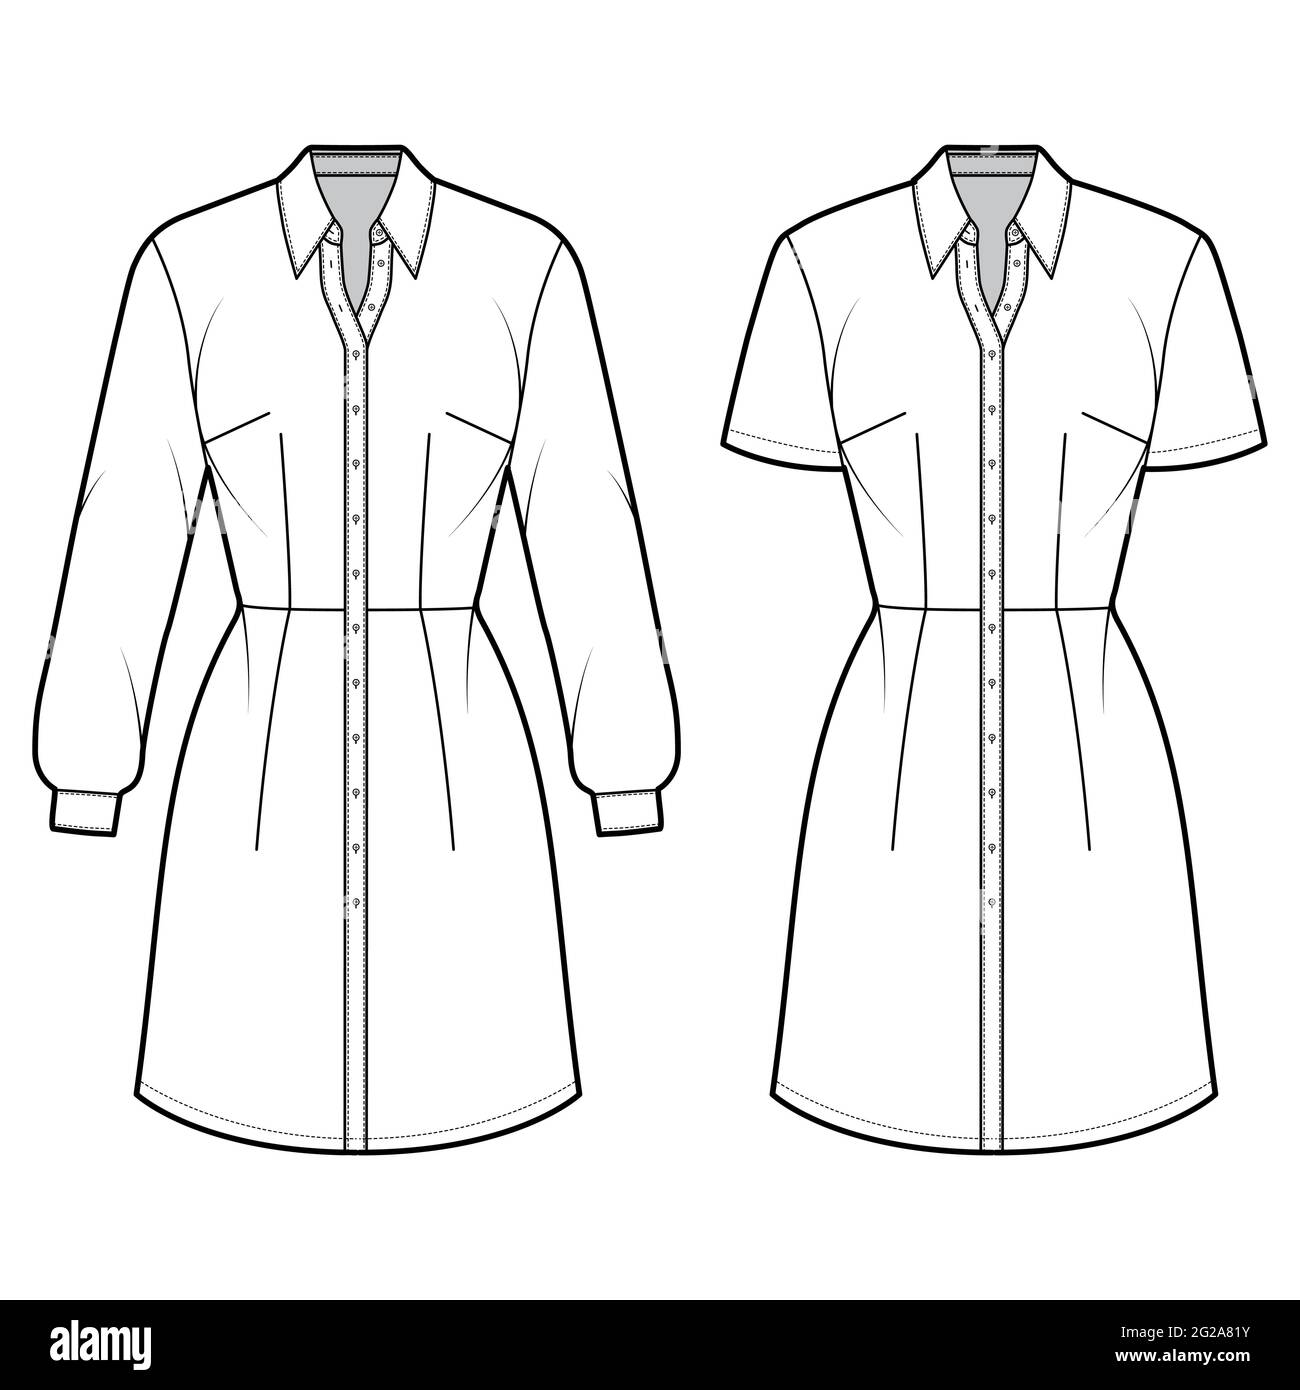 Set of Dresses shirt technical fashion illustration with long short sleeves, fitted body, knee length pencil skirt, classic collar, button closure. Flat apparel front, white color. Women, CAD mockup Stock Vector